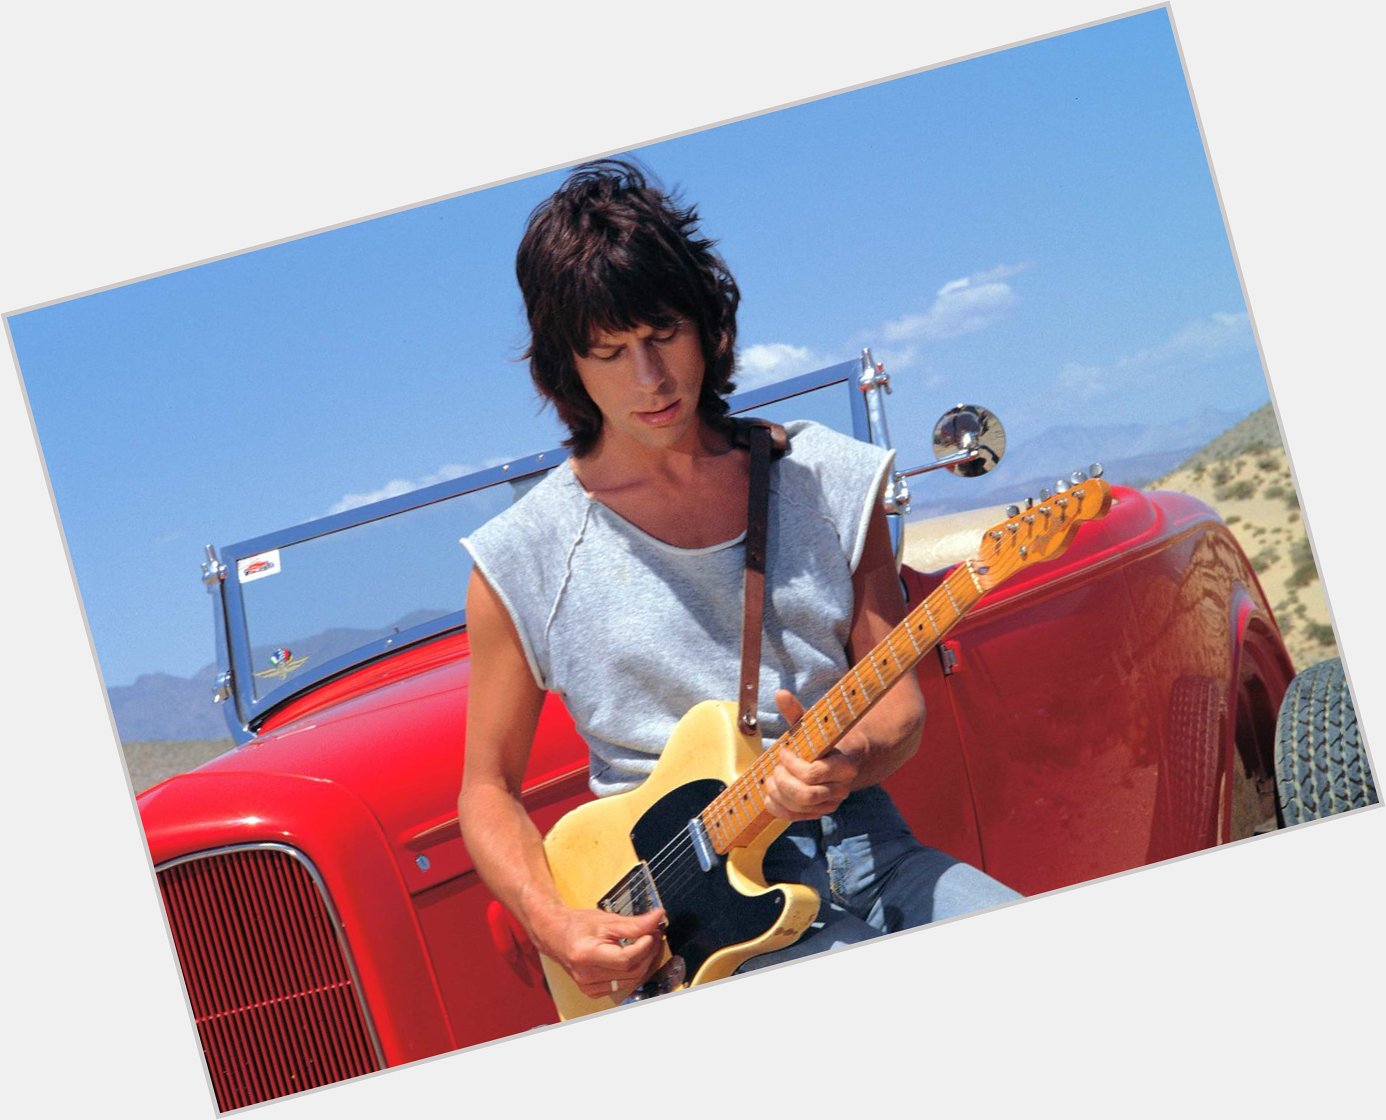 Big   to the guitar meister Jeff Beck - check out brush with the blues...  